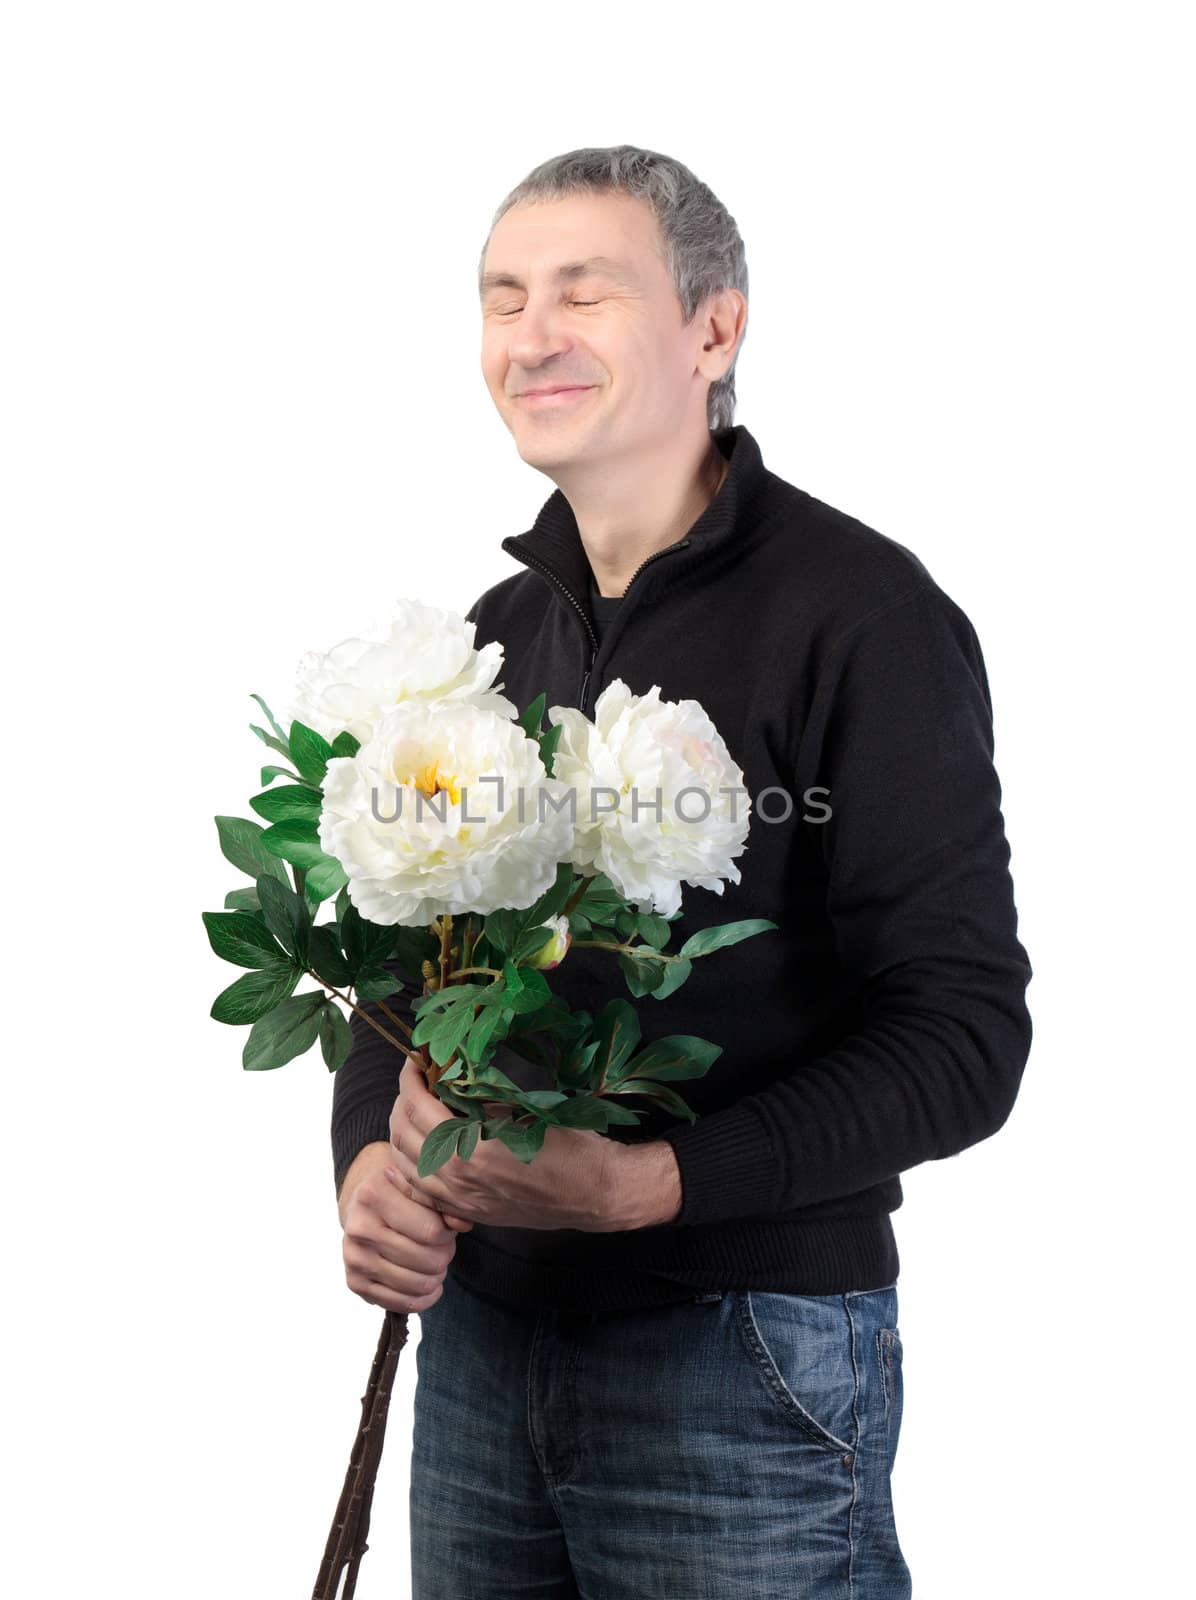 Man holding a bouquet of flowers on white background